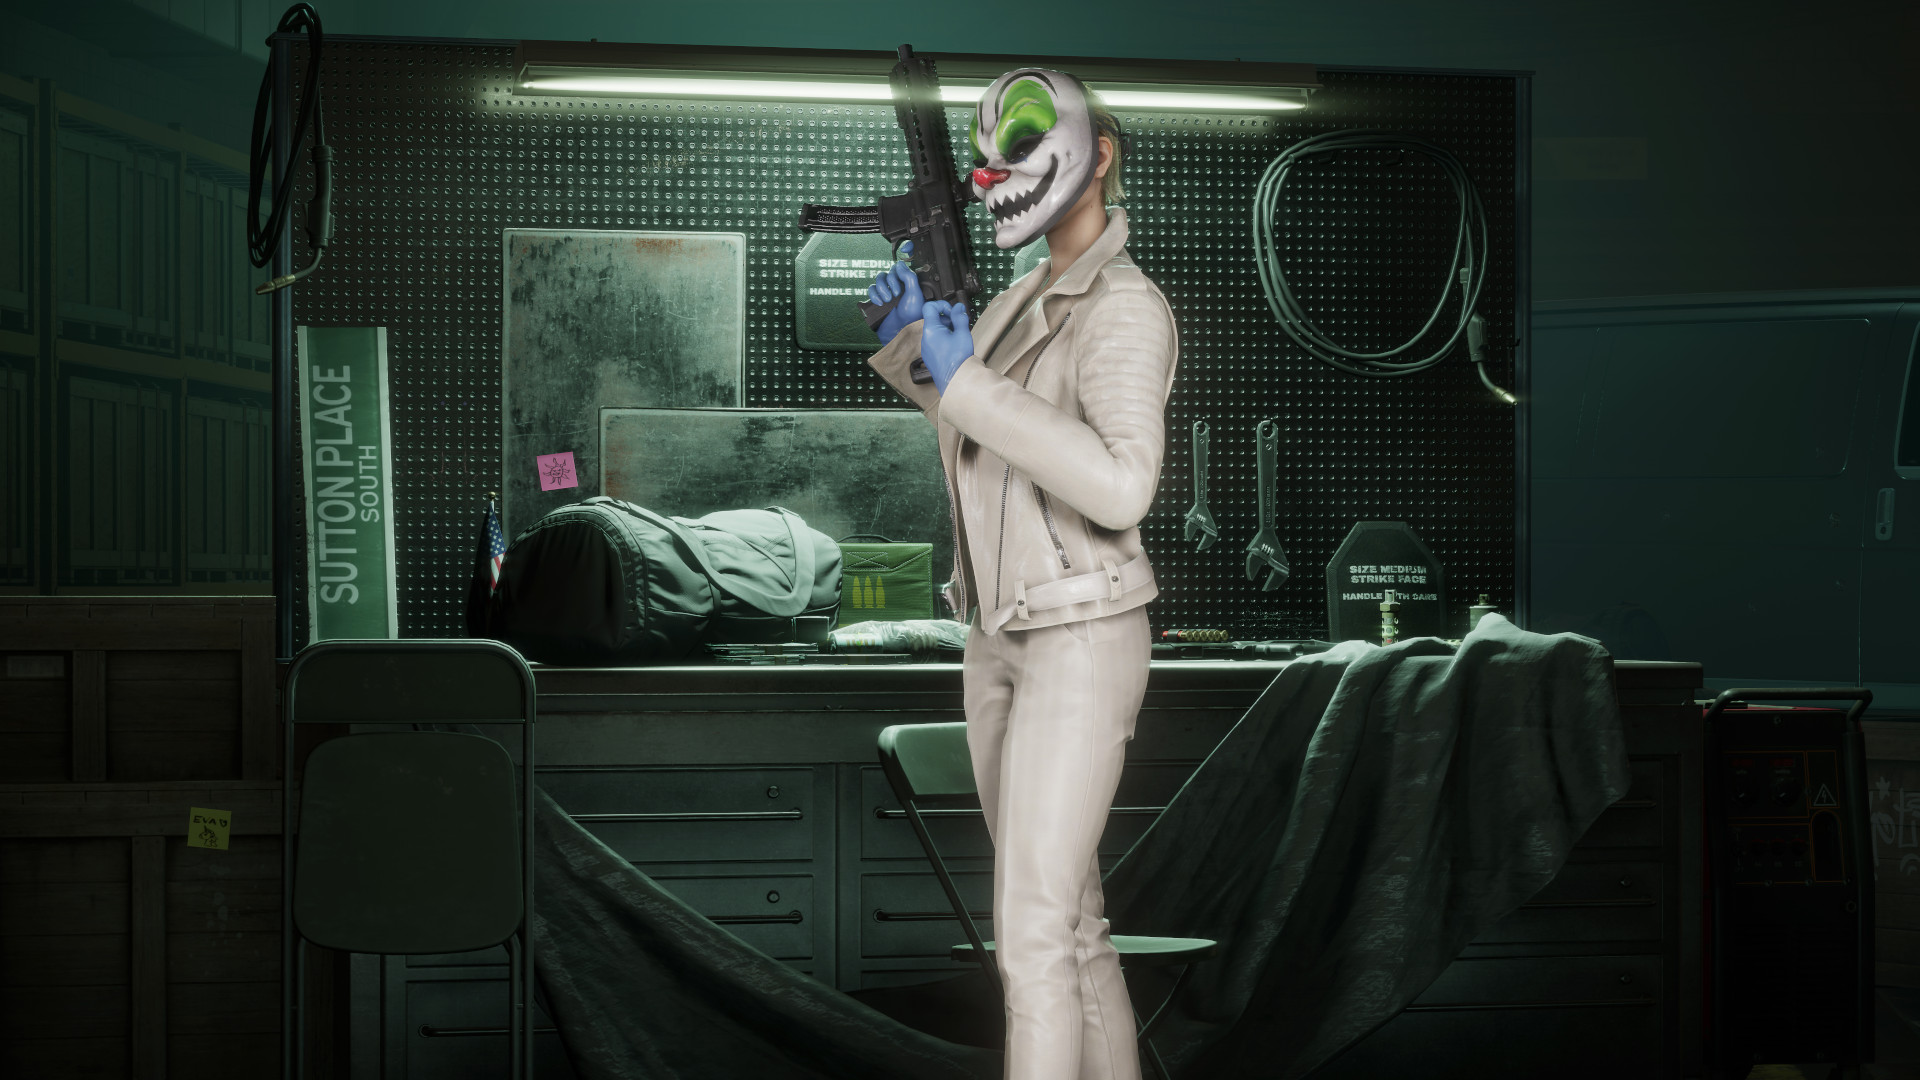 New Payday 3 playable characters and DLC roadmap revealed